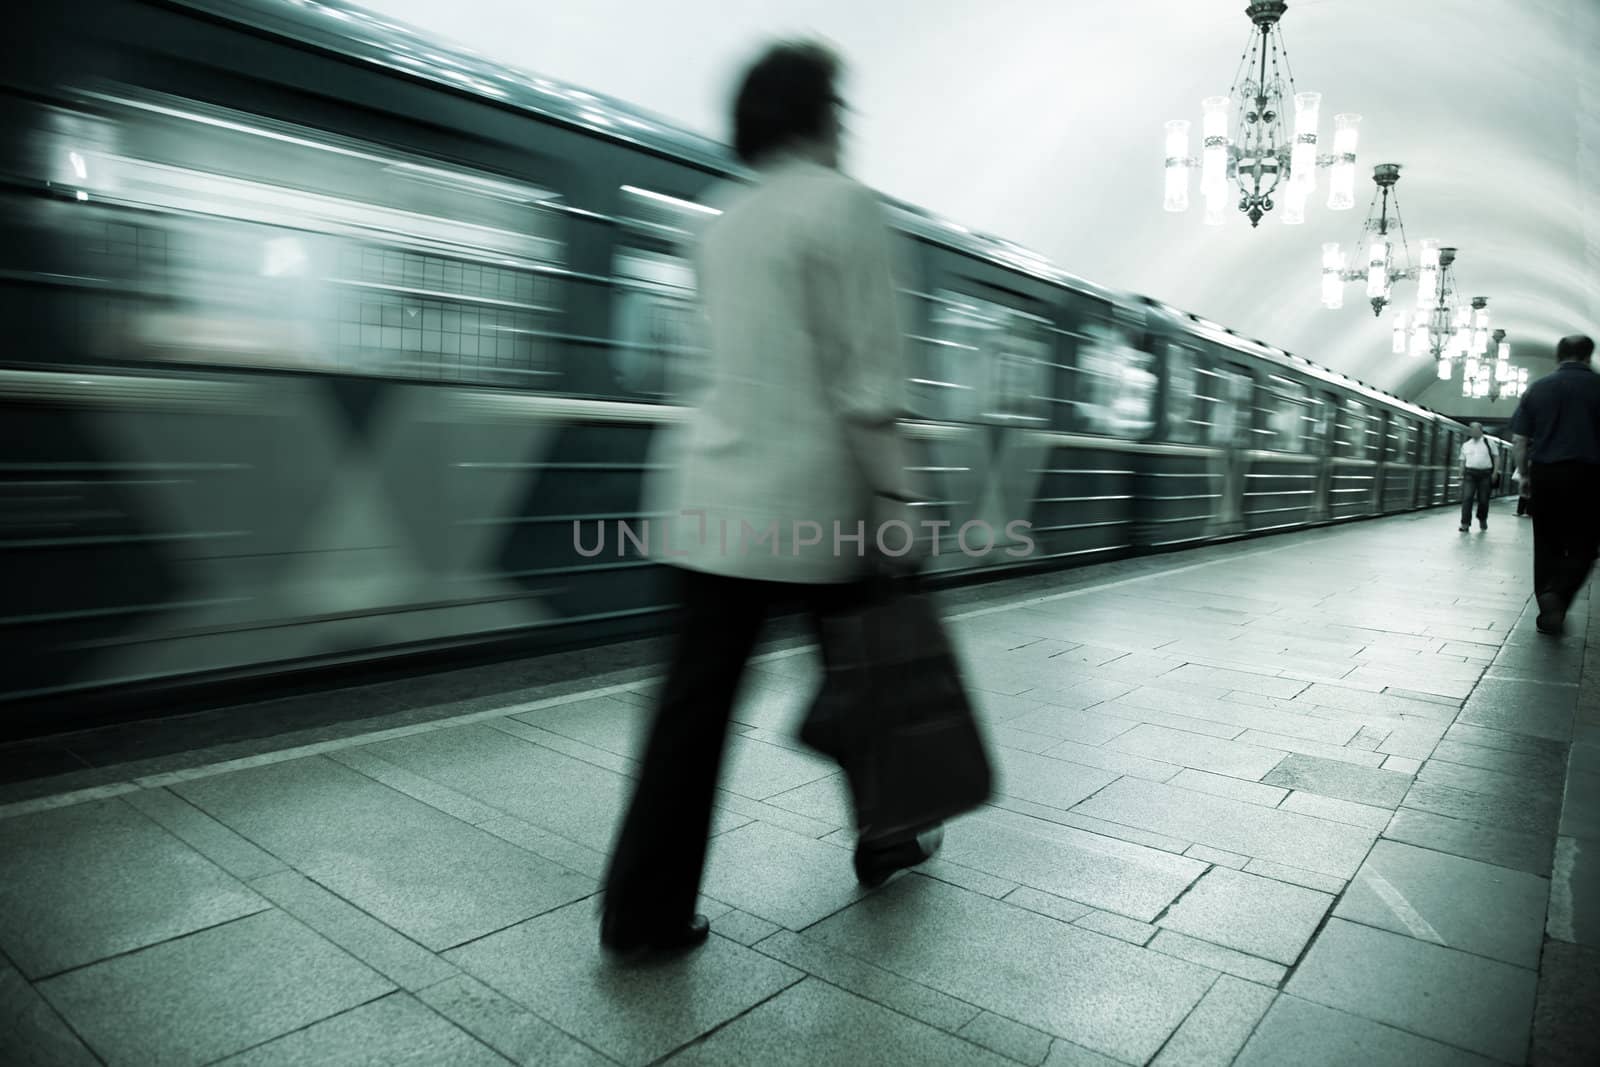 undrground life, all people with defocused and unrecognizable faces, special toned